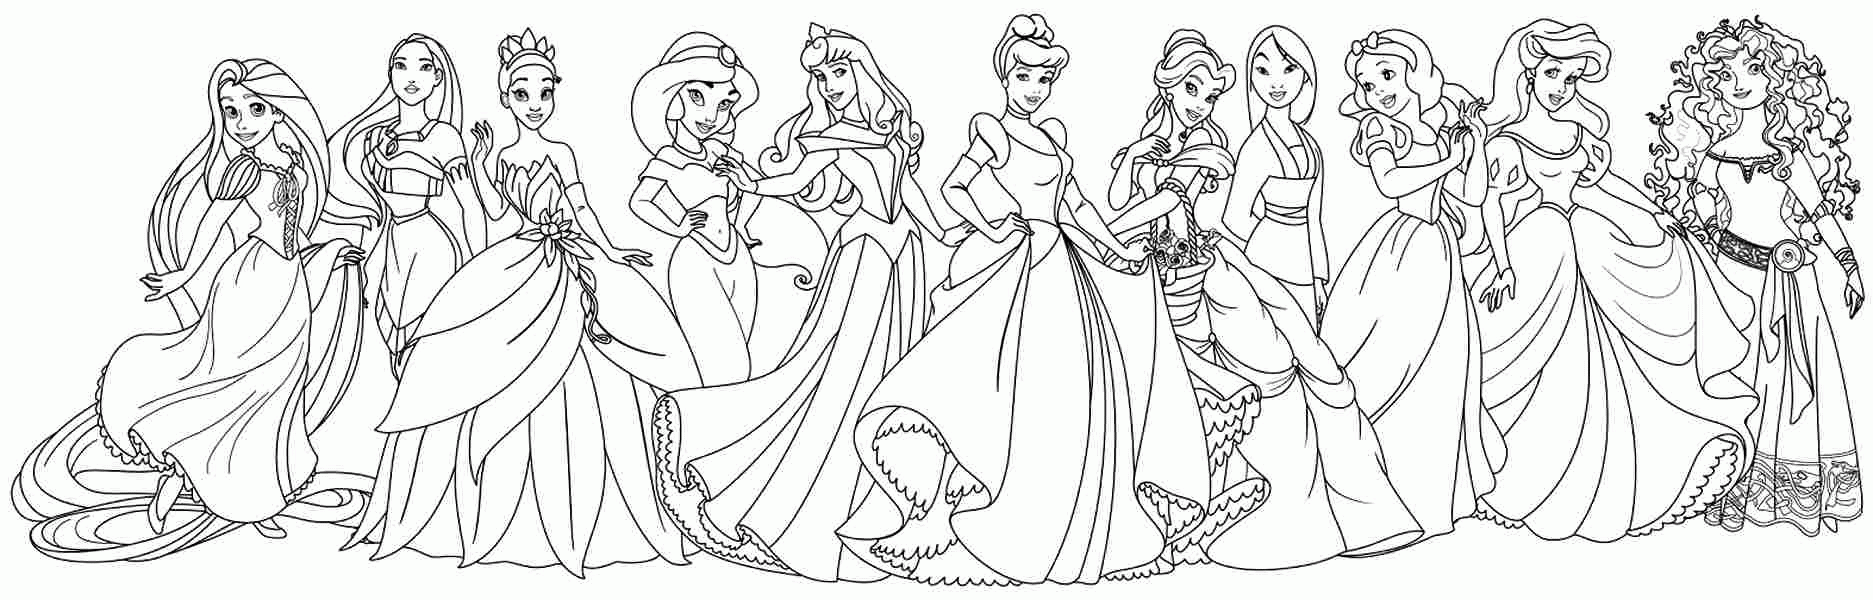 disney princess free printable coloring pages - coloring home